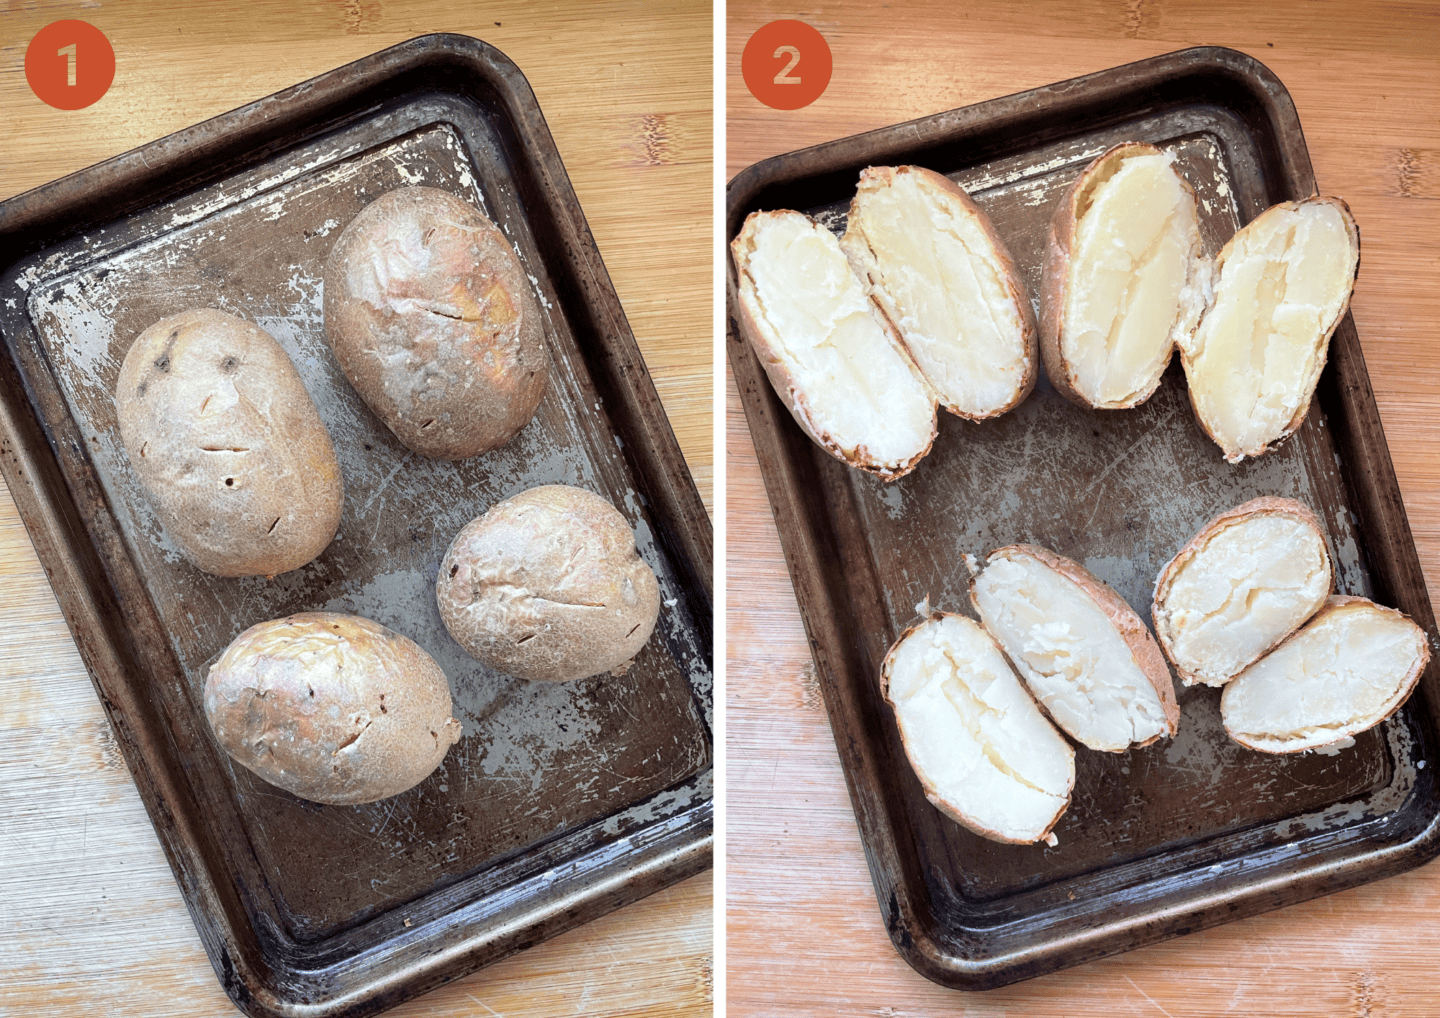 Baked potatoes on an oven tray.